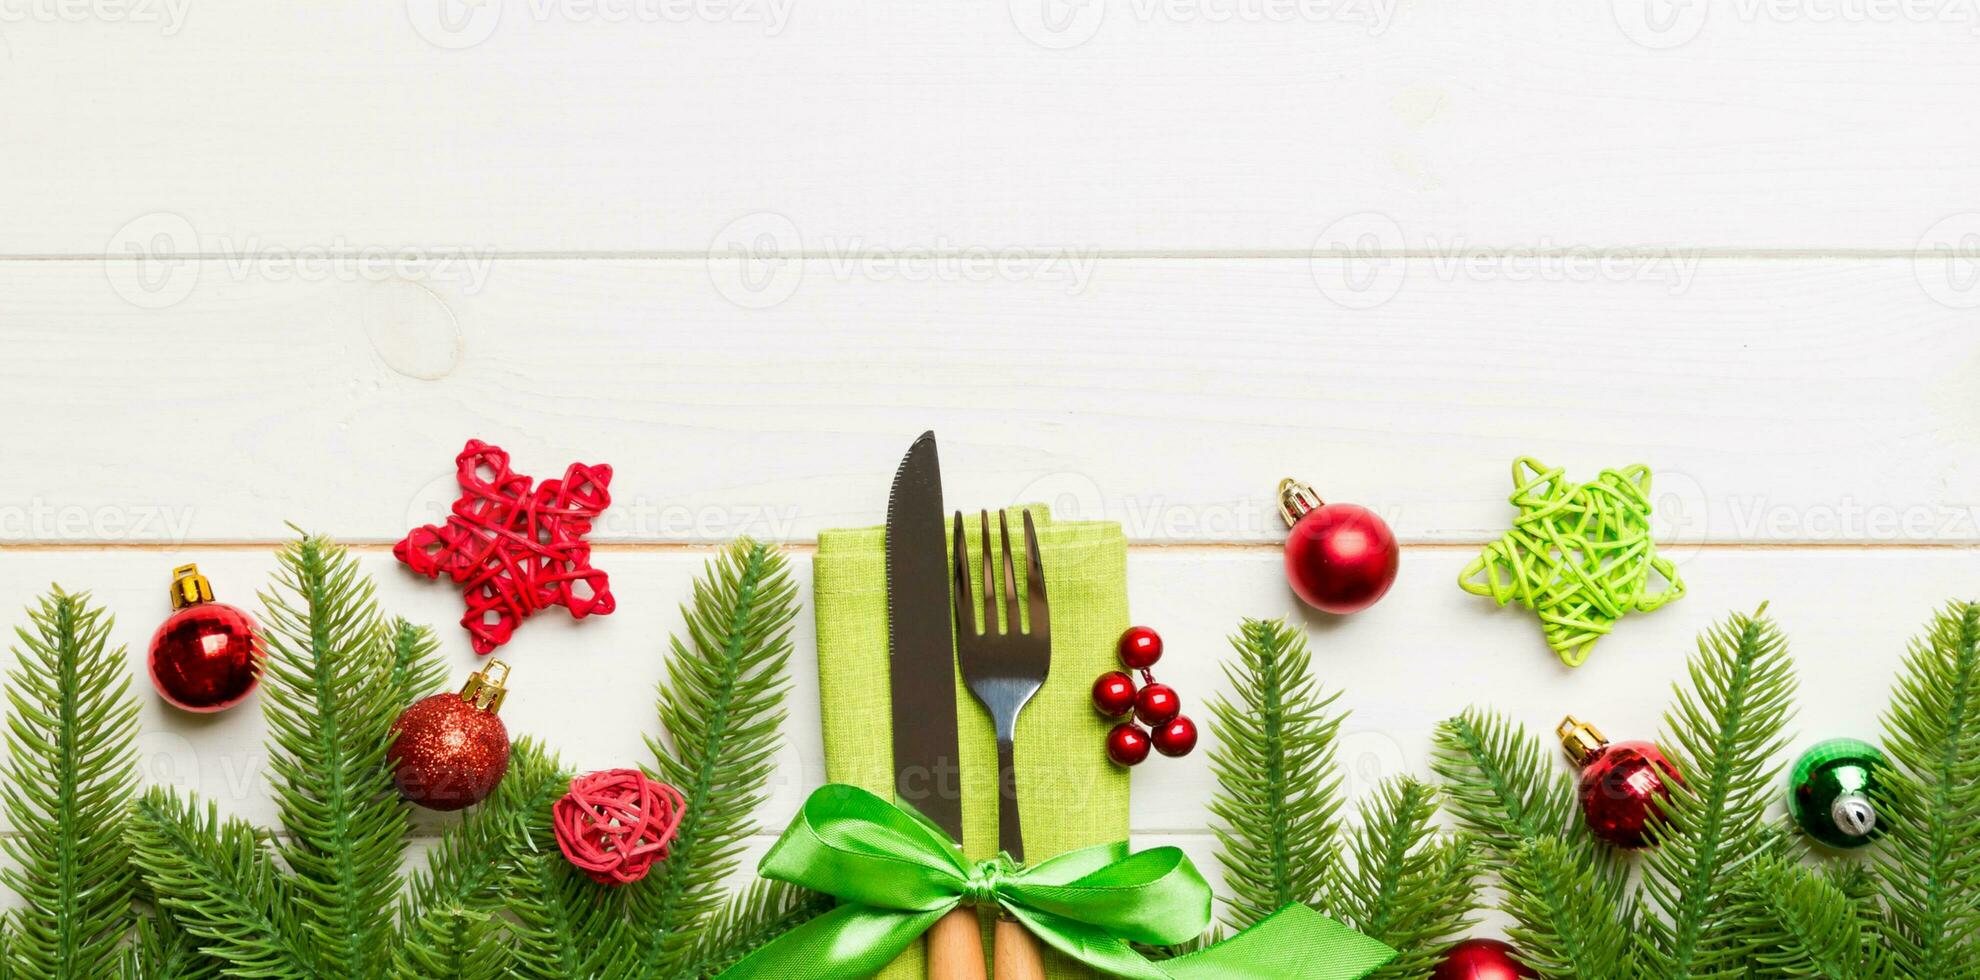 Top view Banner of festive cutlery on new year wooden background. Christmas decorations with empty space for your design. Holiday dinner concept photo